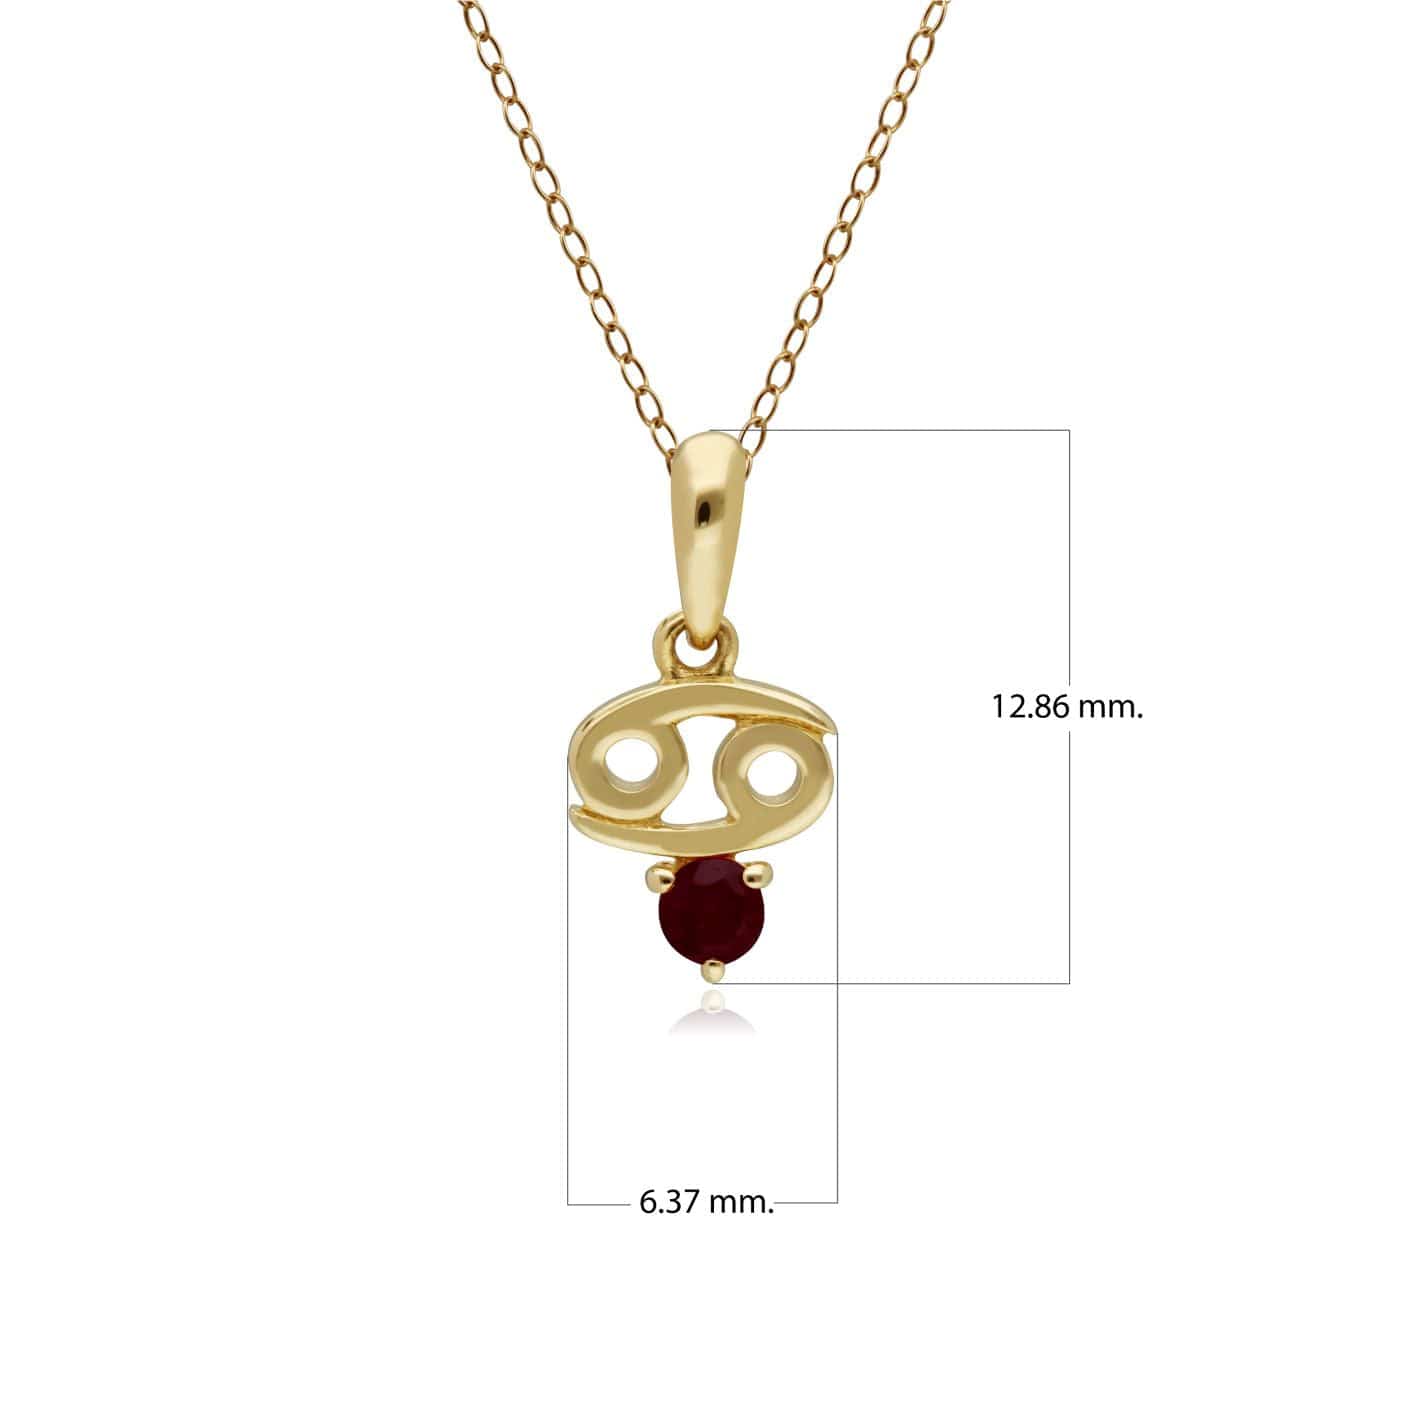 135P1998019 Ruby Cancer Zodiac Charm Necklace in 9ct Yellow Gold 2